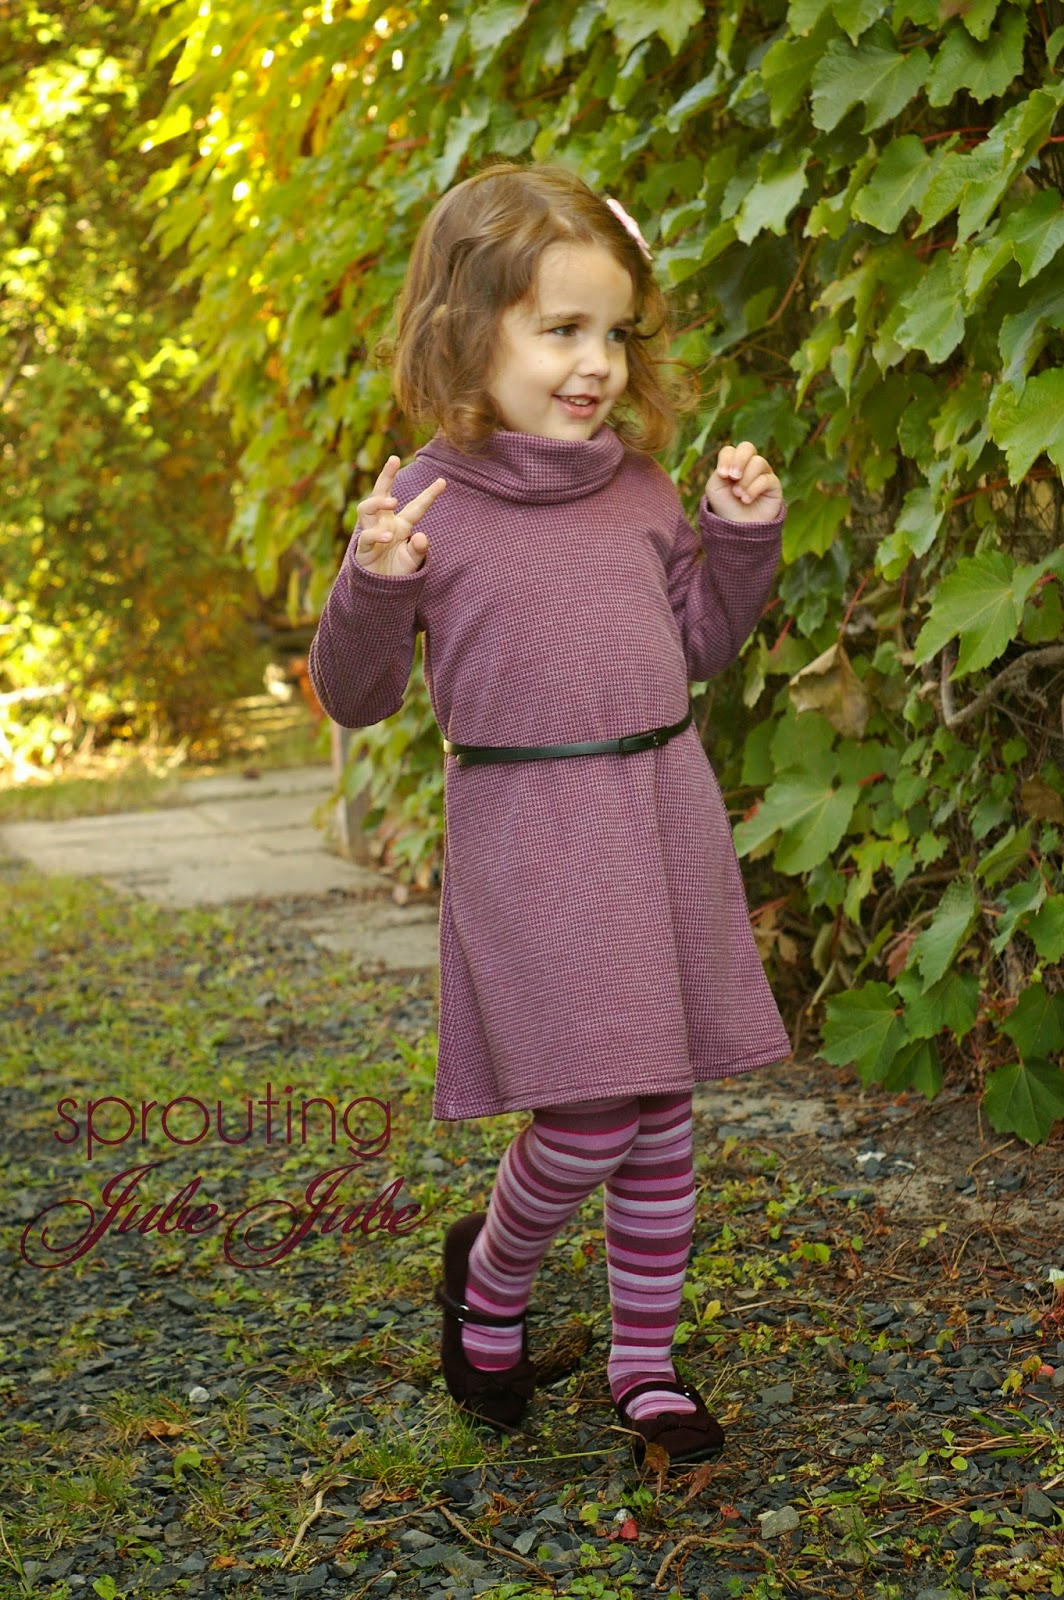 http://sproutingjj.blogspot.ca/2014/09/cowl-neck-dress-and-top-by-heidi-and.html